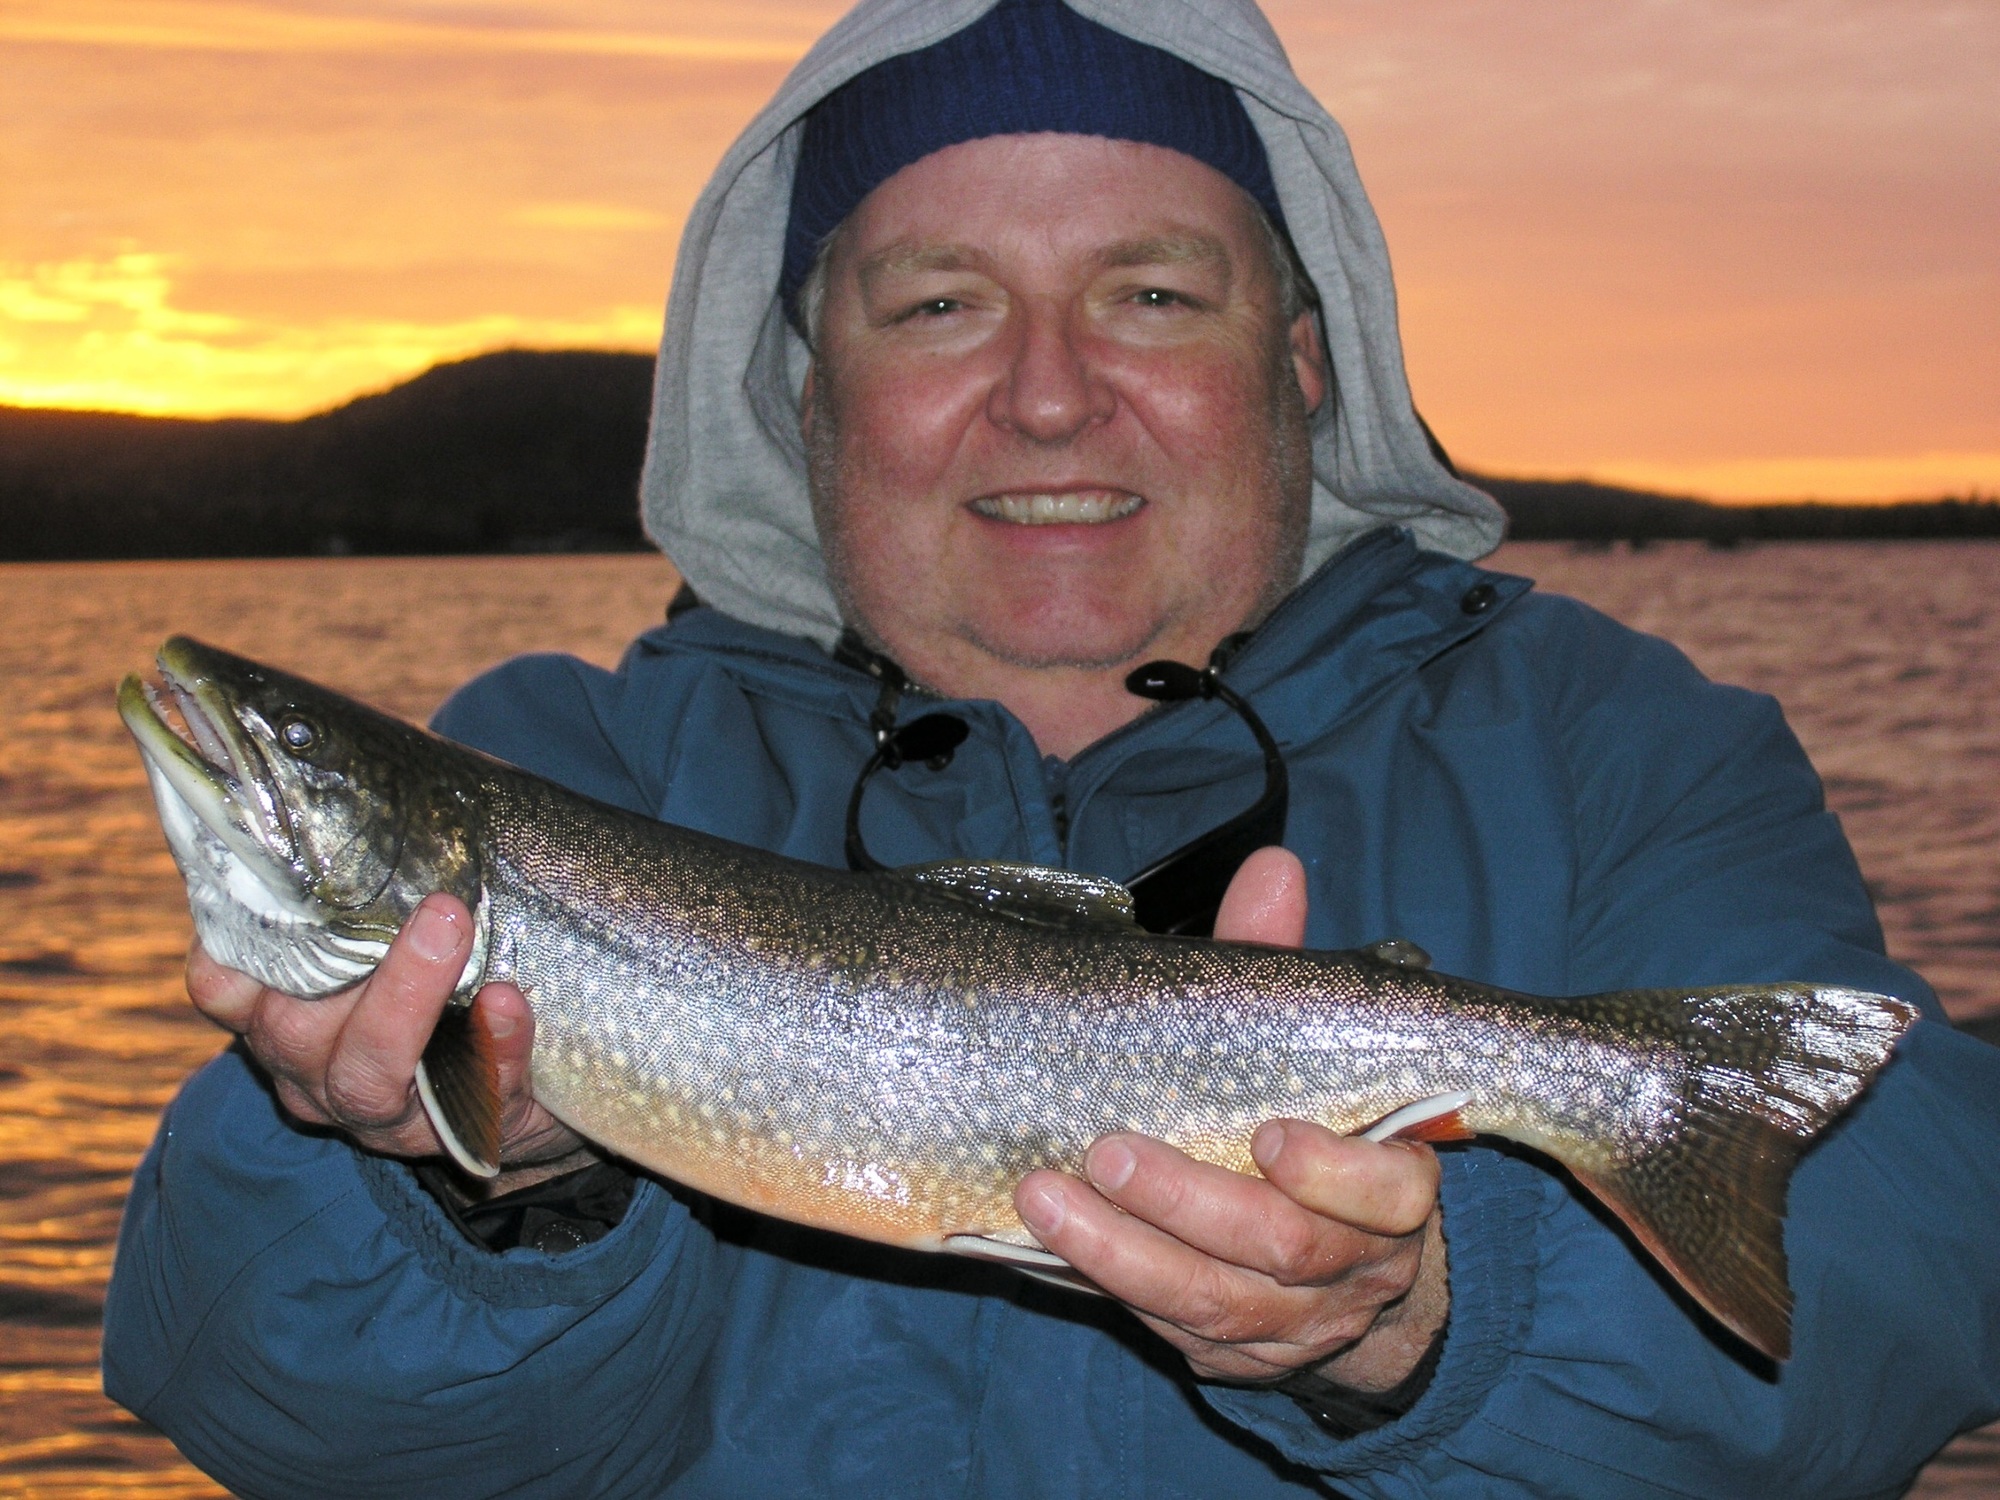 J.R. Richardson of Ontonagon with a brook trout he caught at sunrise on an Upper Peninsula lake.